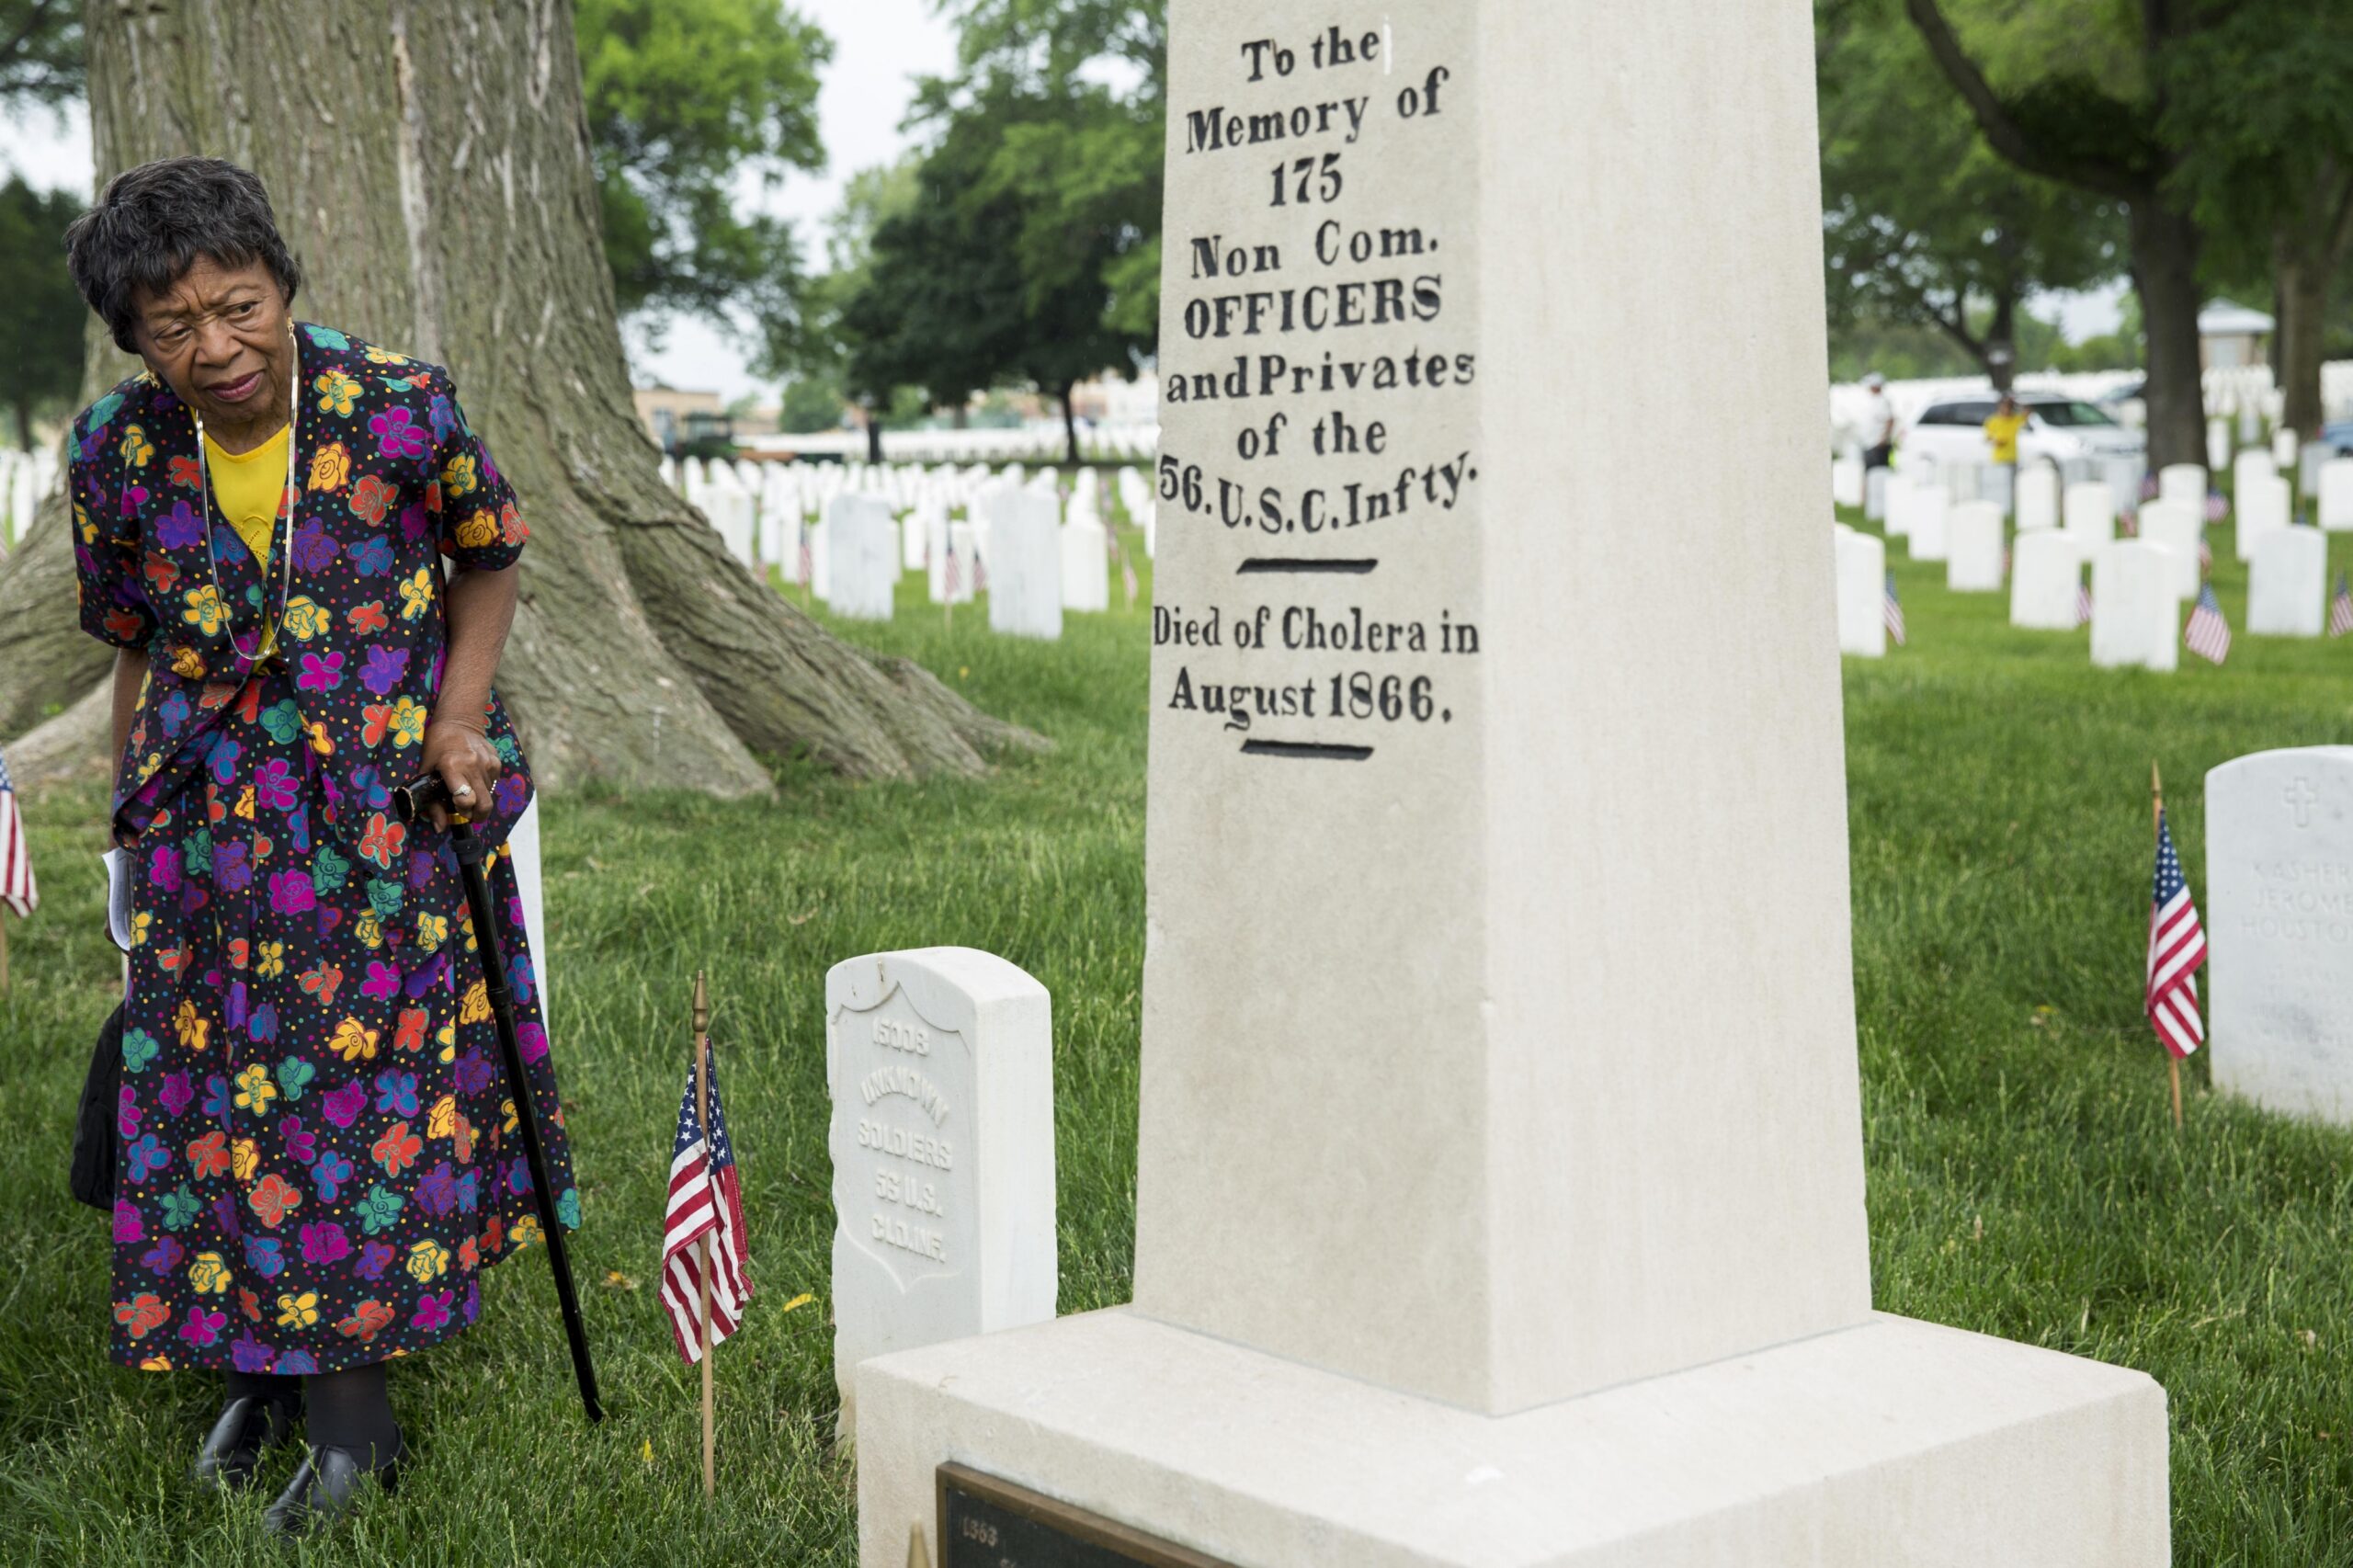 Edwina W. Lindsey looks at the grave marker of former slaves who fought in the Civil War